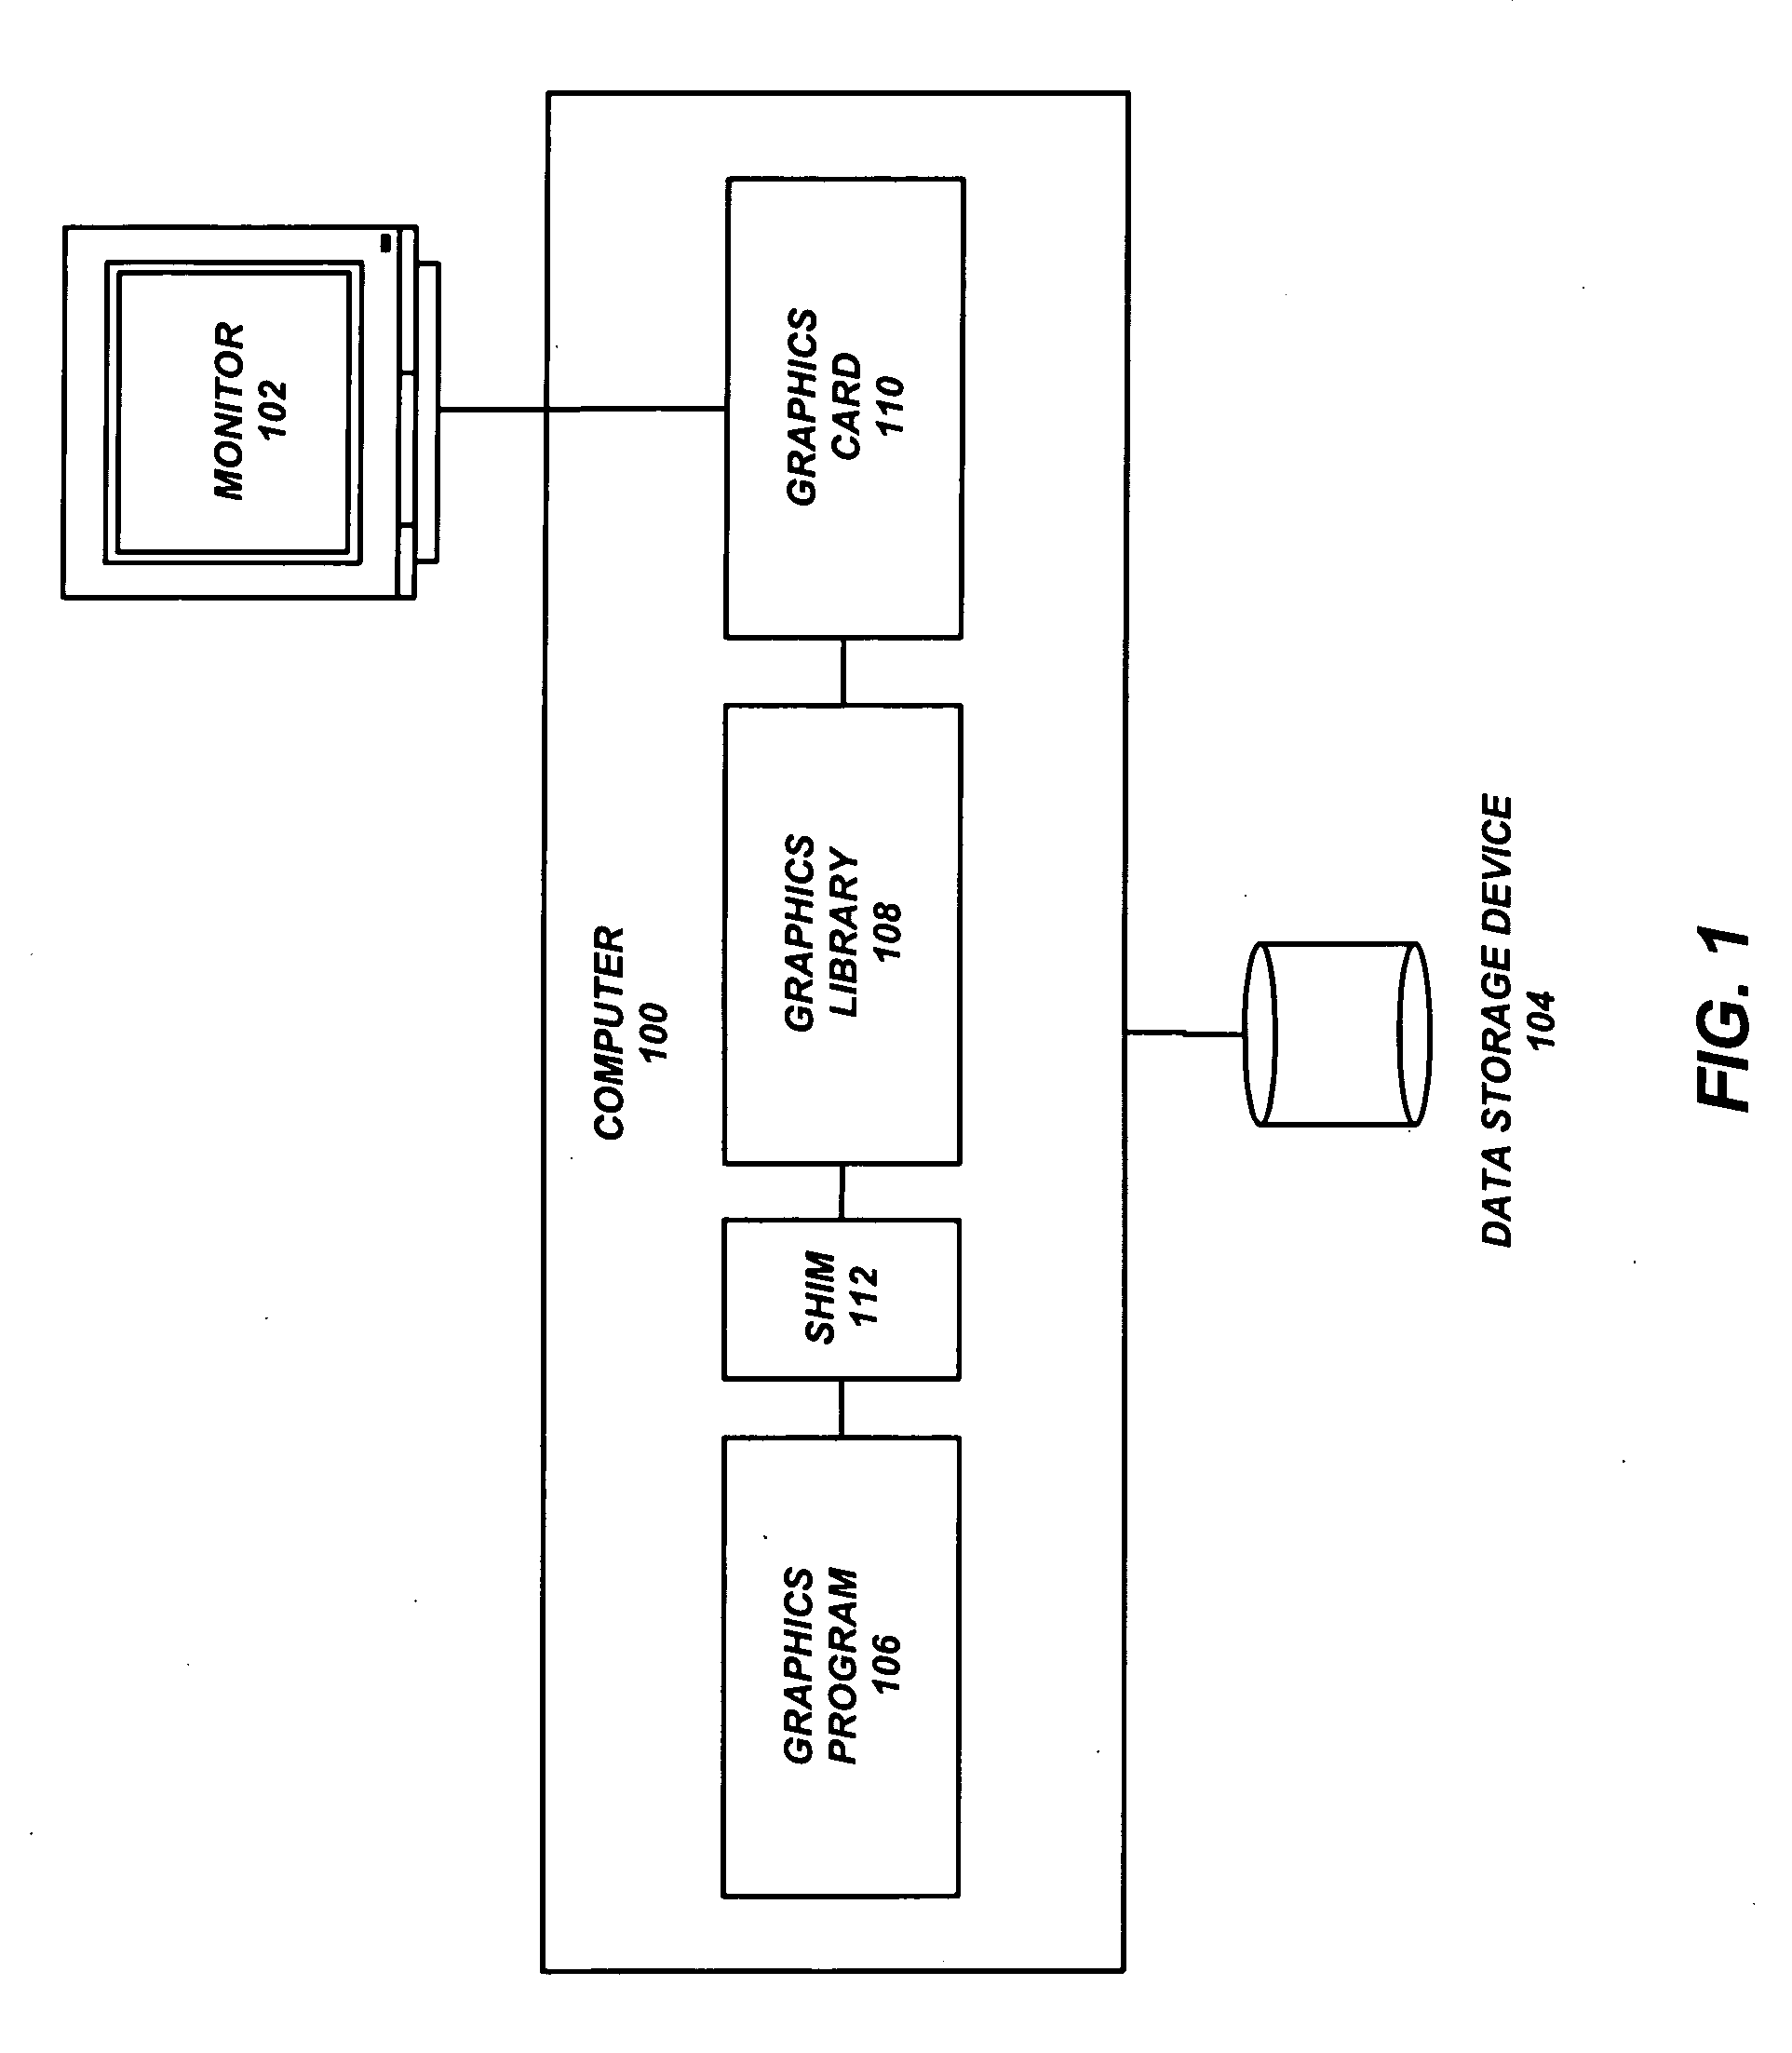 Application-independent method for capturing three-dimensional model data and structure for viewing and manipulation